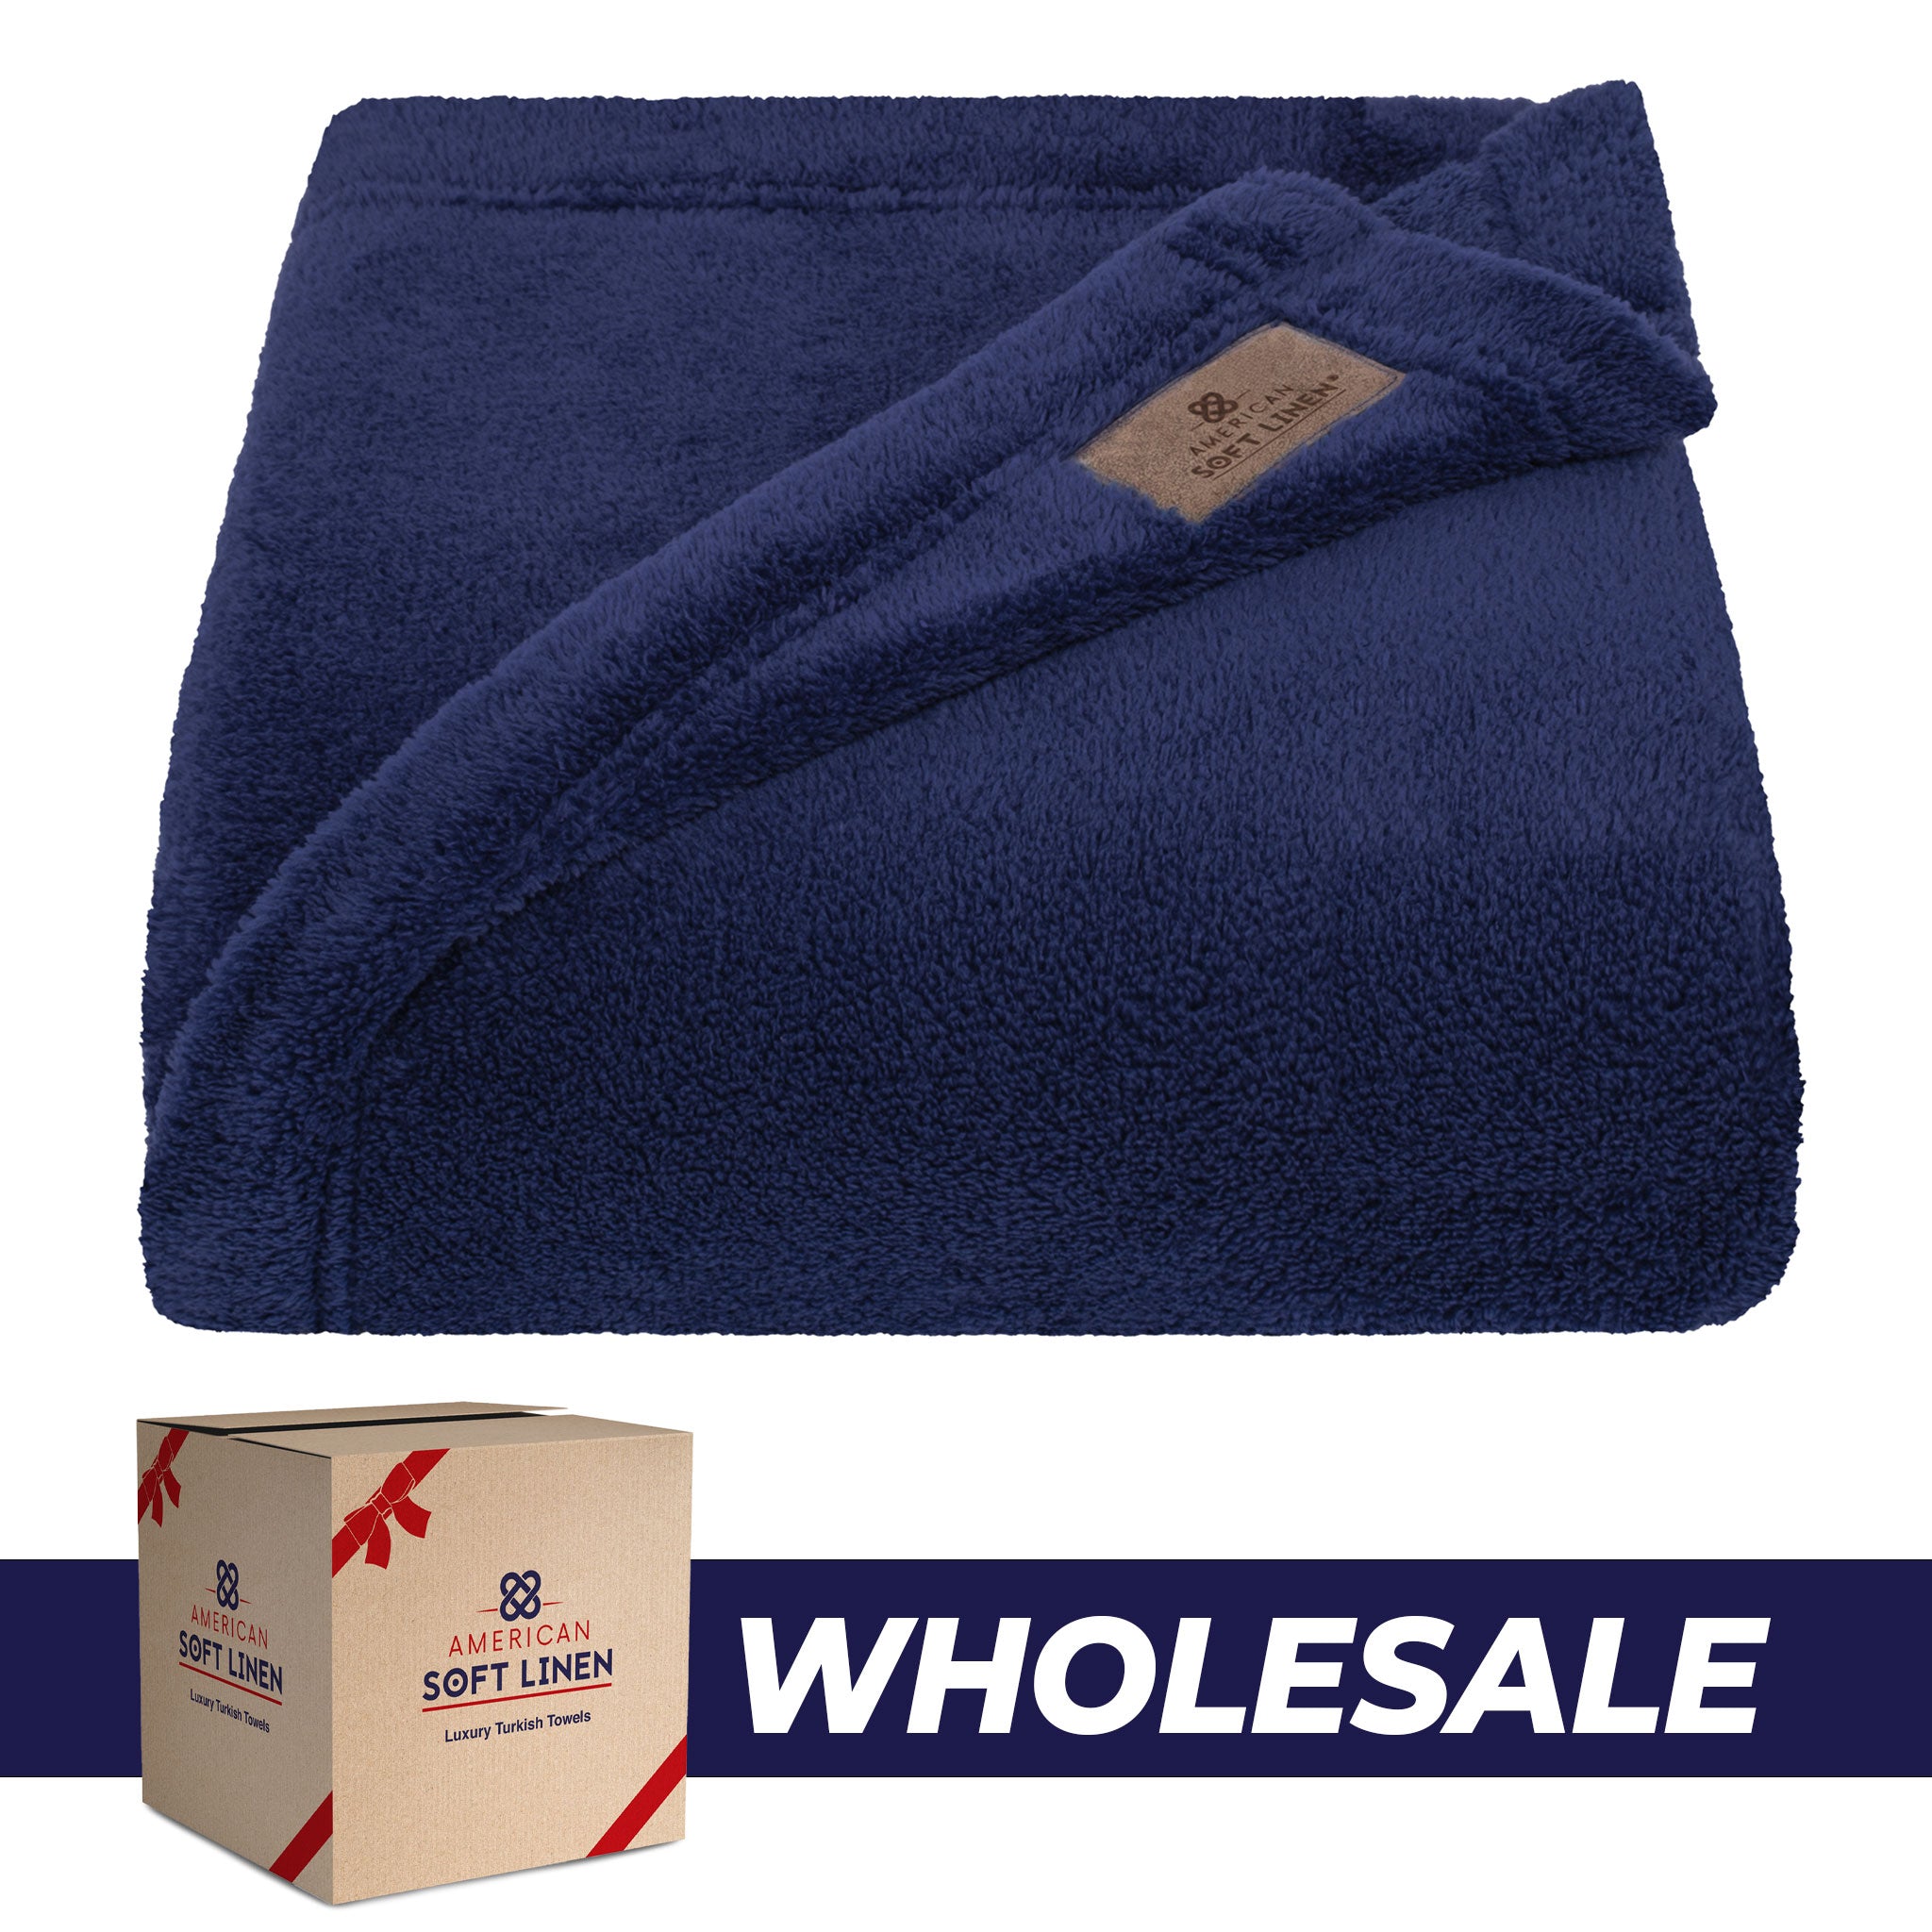 American Soft Linen - Bedding Fleece Blanket - Wholesale - 24 Set Case Pack - Throw Size 50x60 inches - Navy-Blue - 0